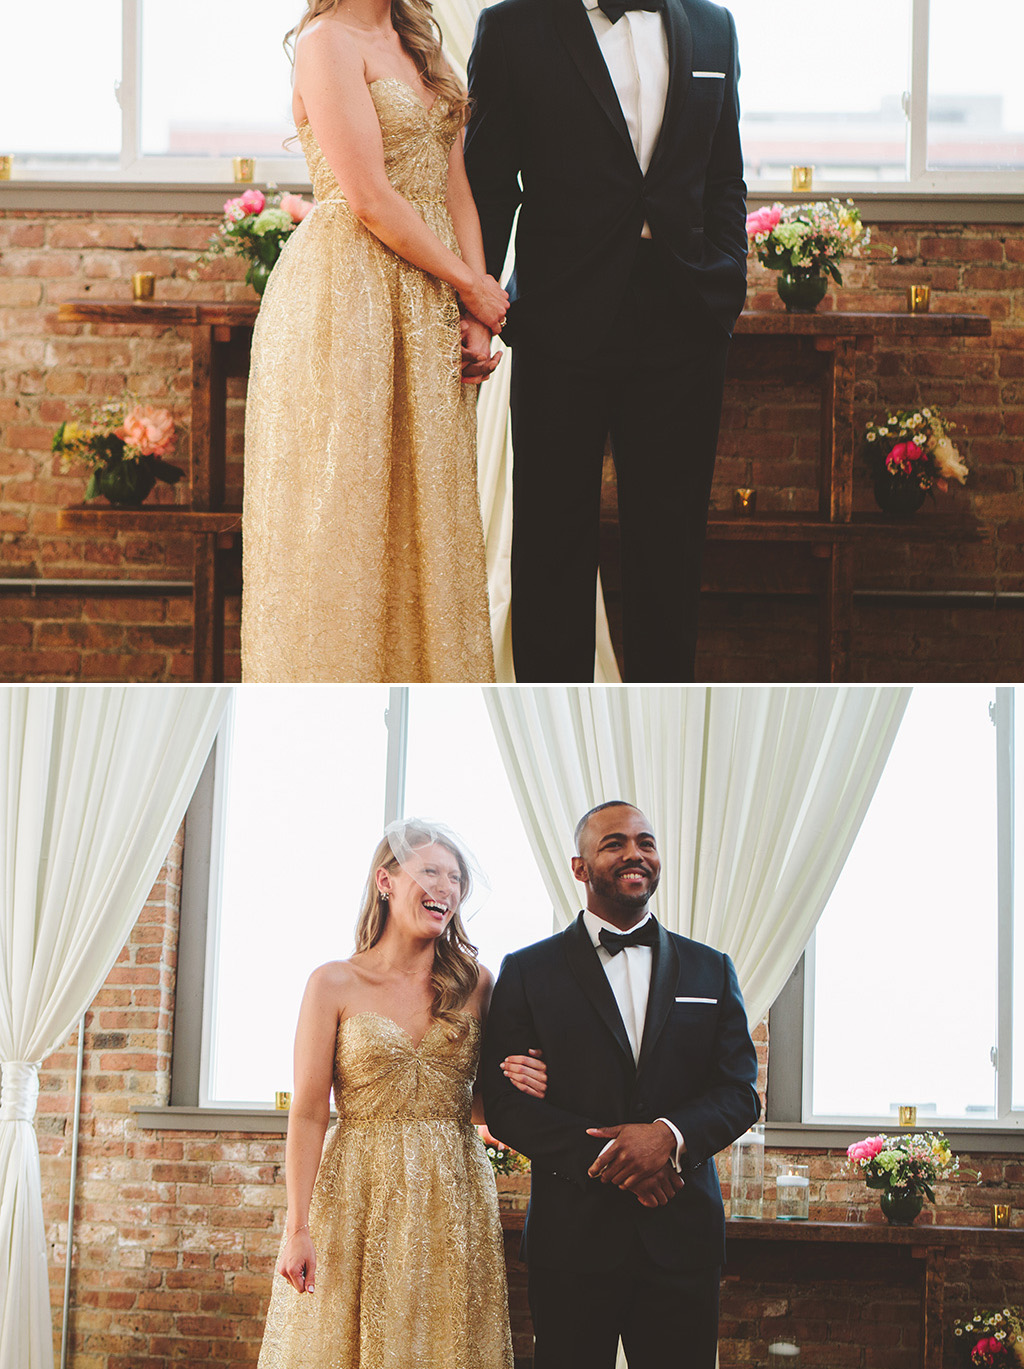 A city wedding in chicago